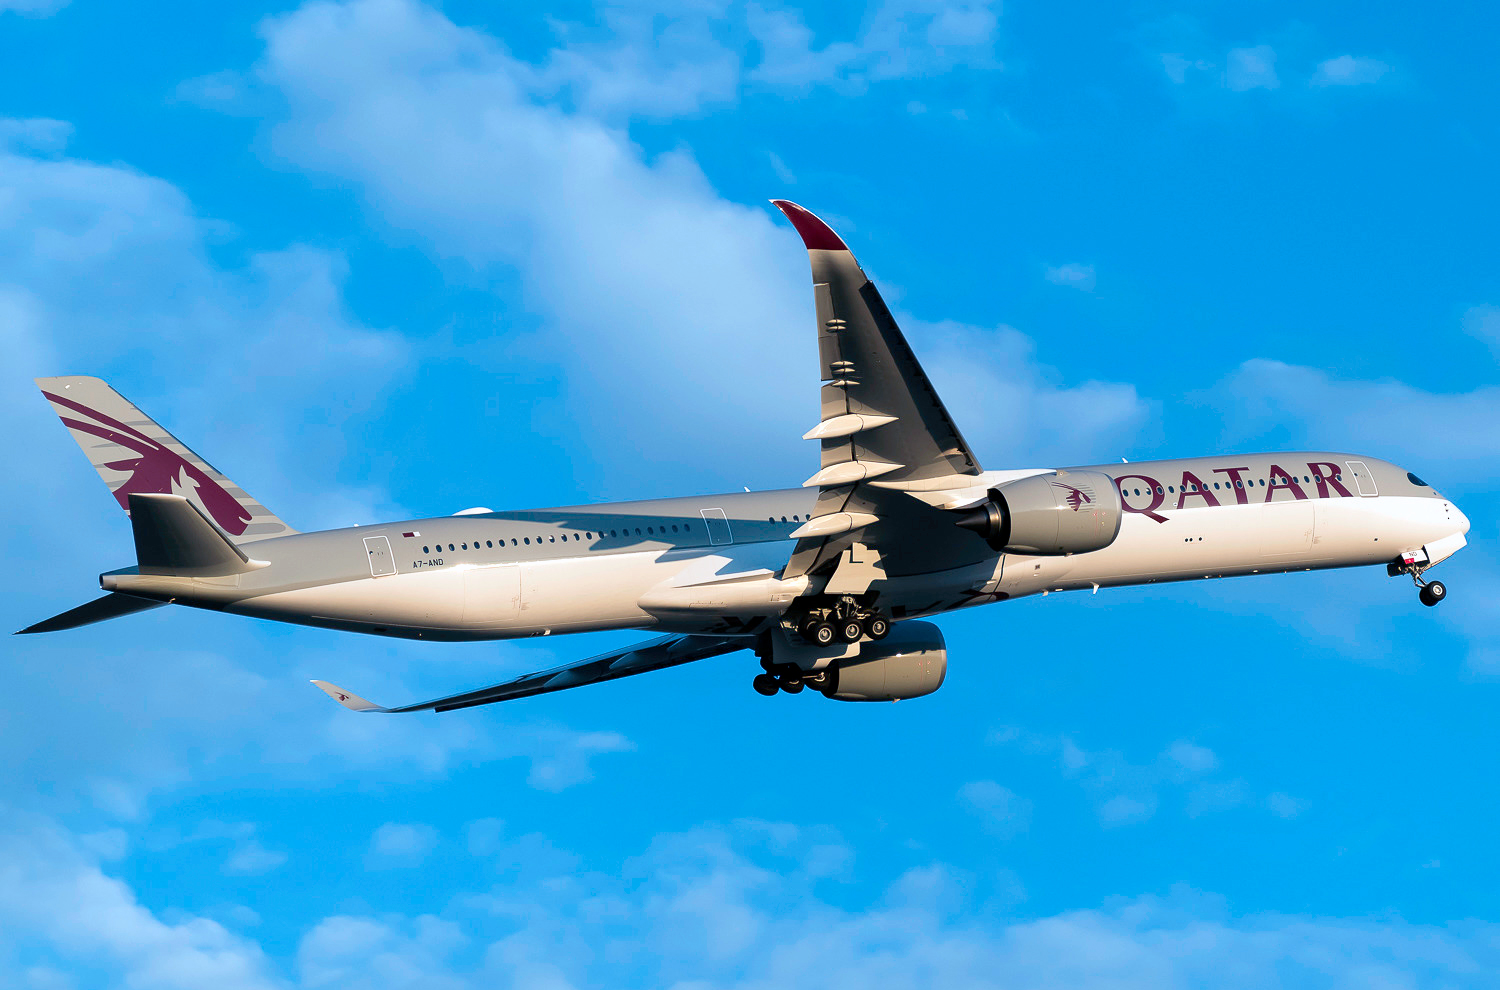 Airbus A350 1000 Qatar Airways. Photo And Description Of The Plane